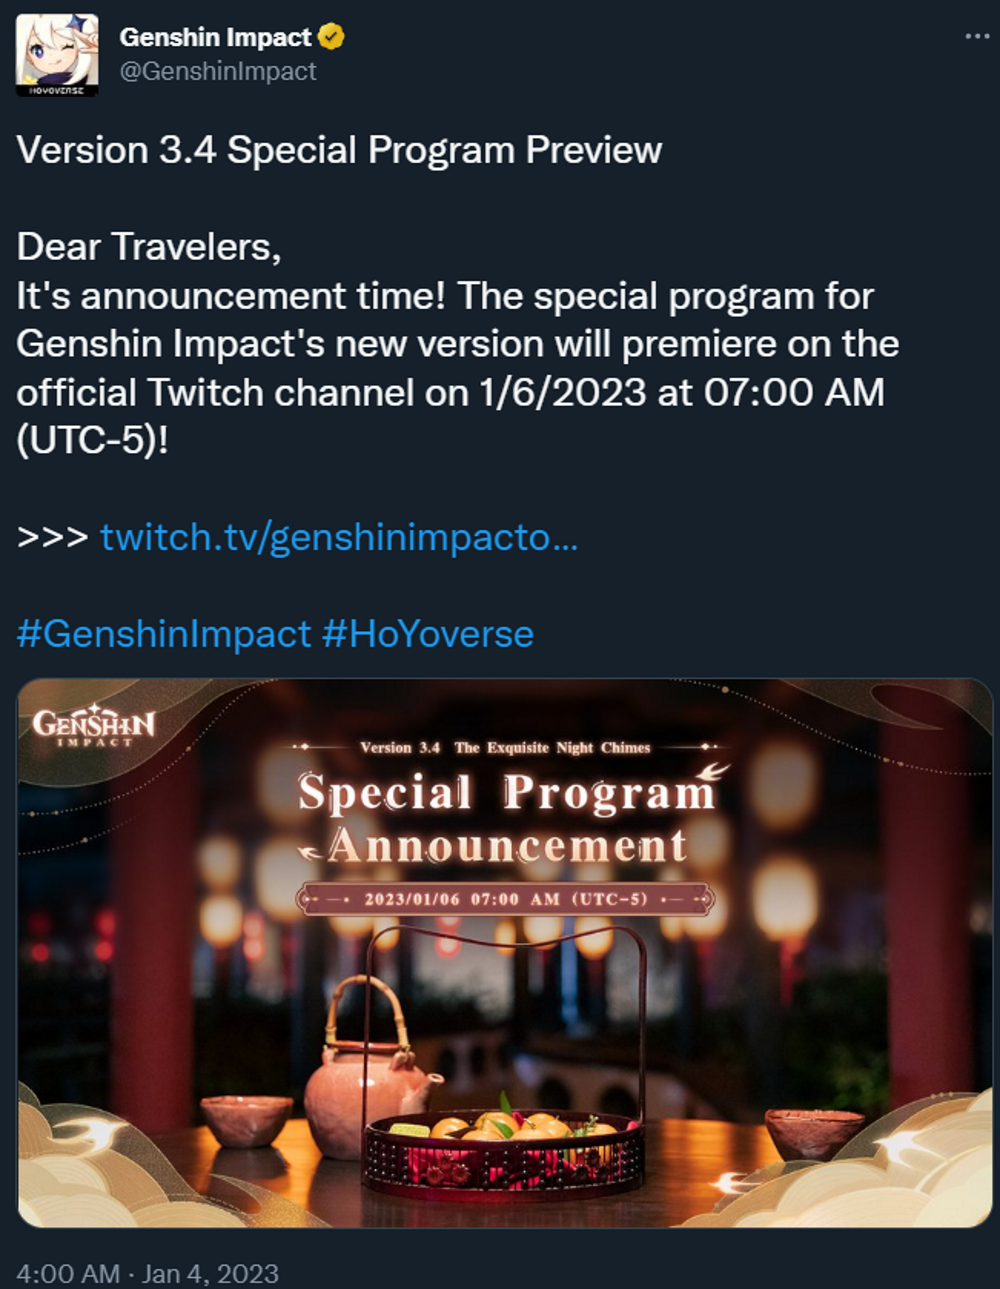 The official Genshin Impact Twitter account reveals the Version 3.4 Special Program Preview's premiere date via Twitter